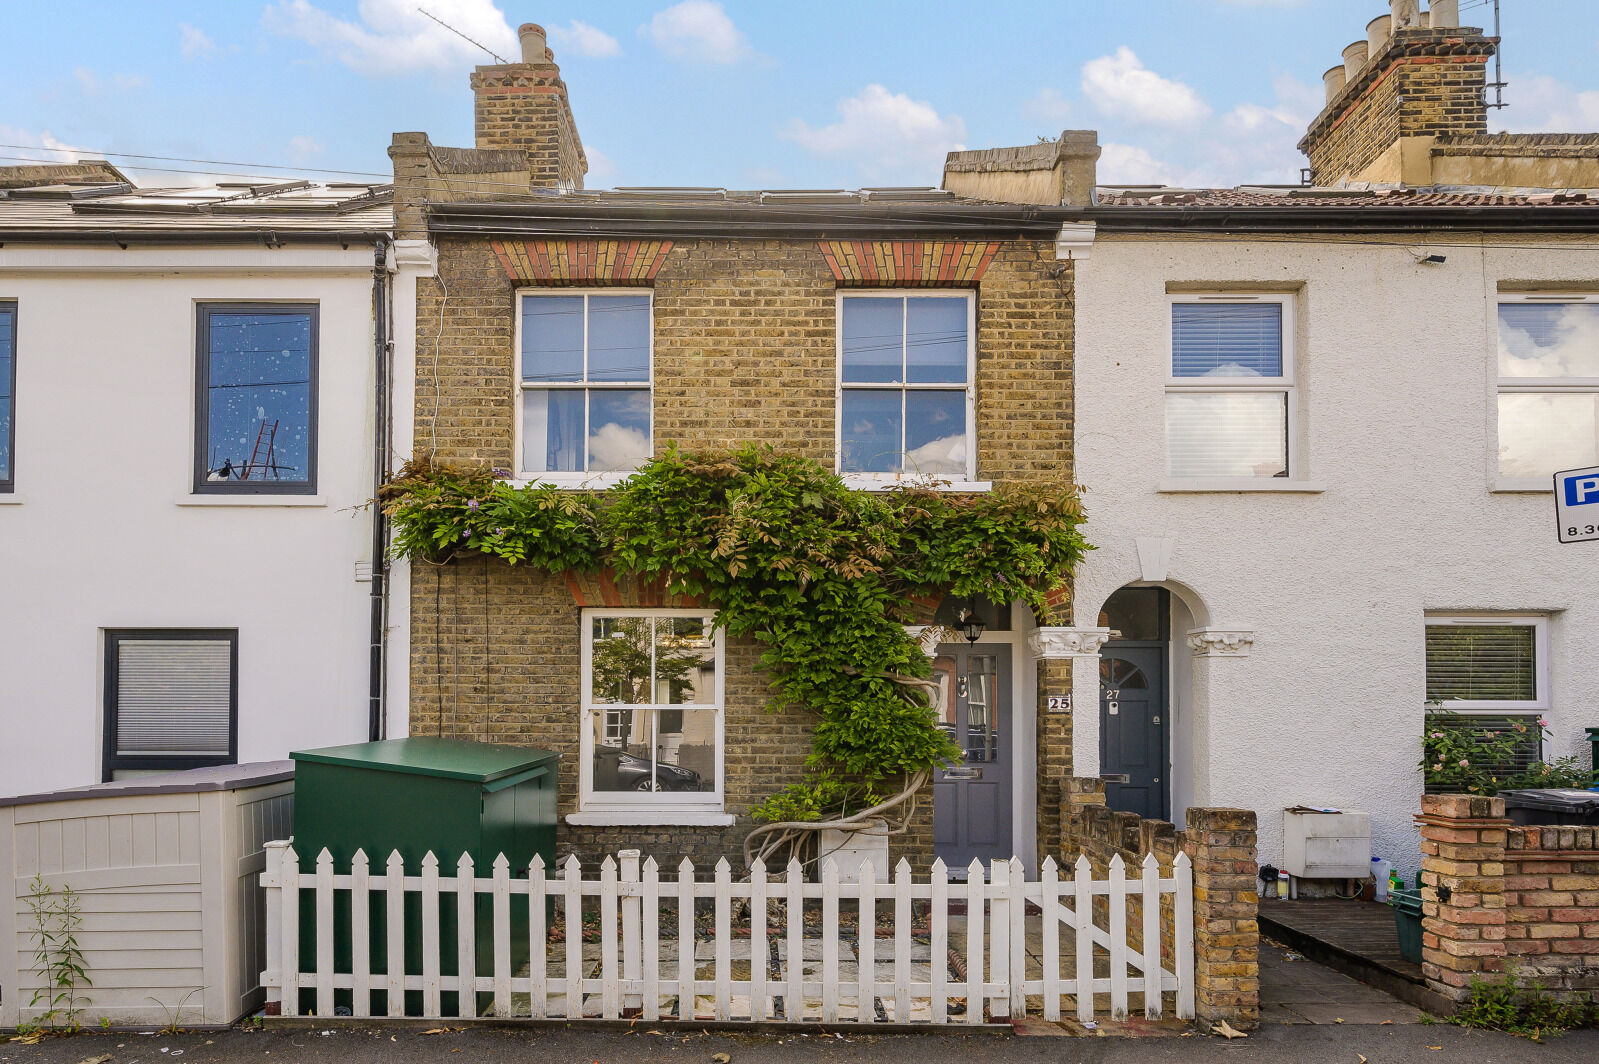 3 bedroom mid terraced house for sale Newton Road, Wimbledon, SW19, main image